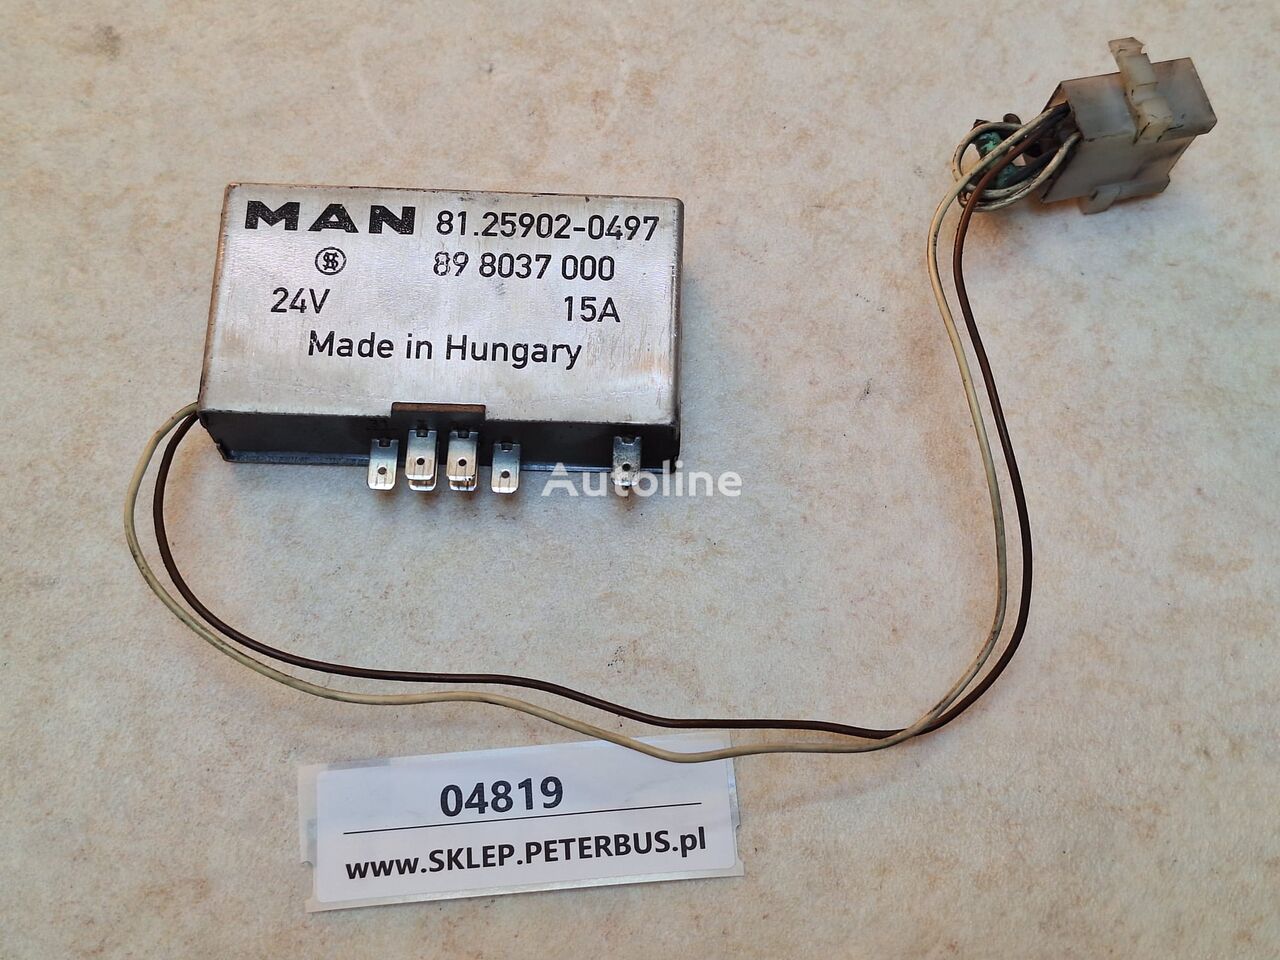 MAN 81.25902-0497 relay for bus